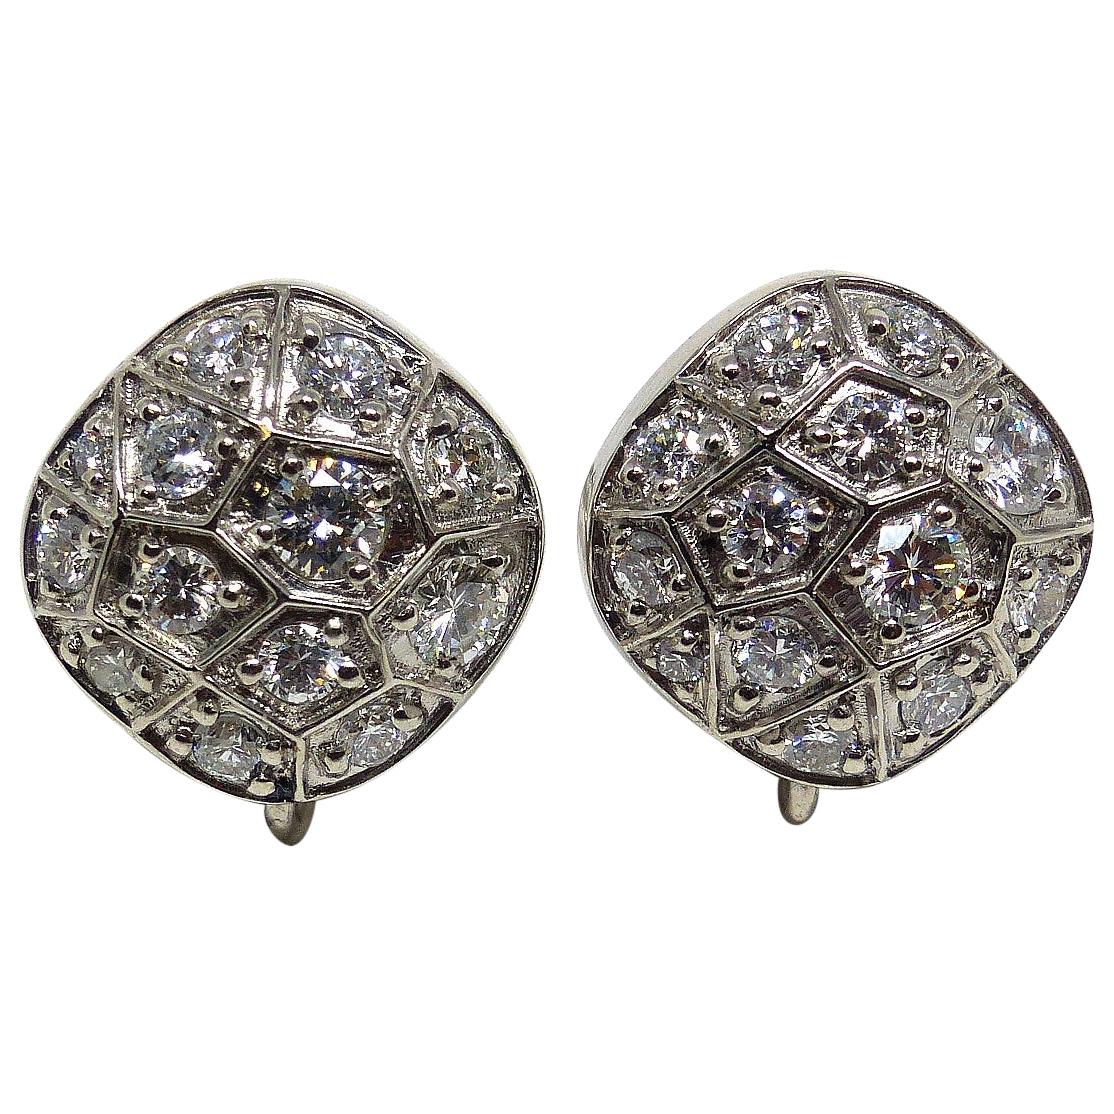 Earrings in White Gold with 26 Diamonds, 1, 56ct..